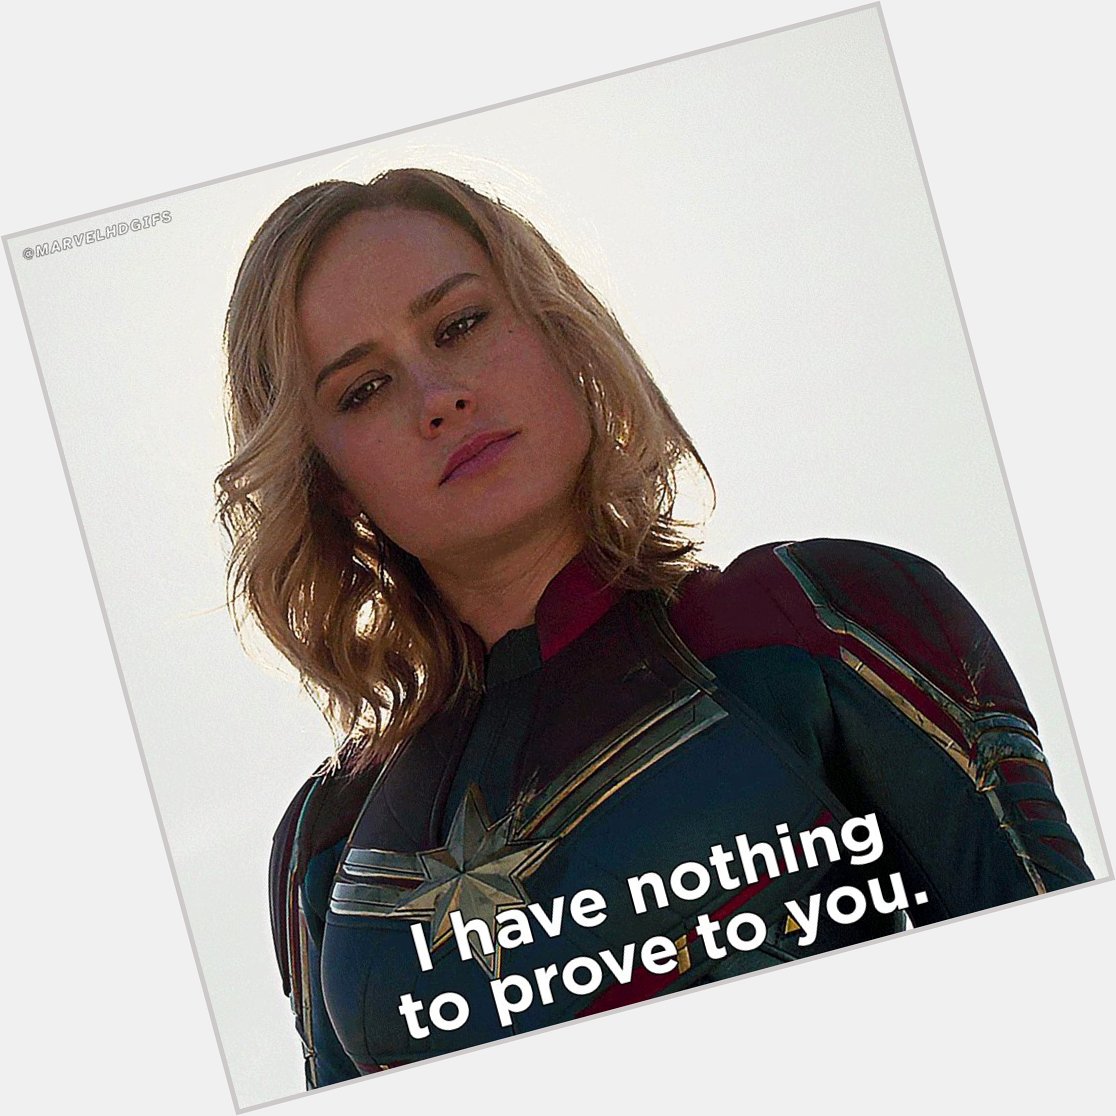 Happy Birthday to our Captain Marvel Brie Larson! 